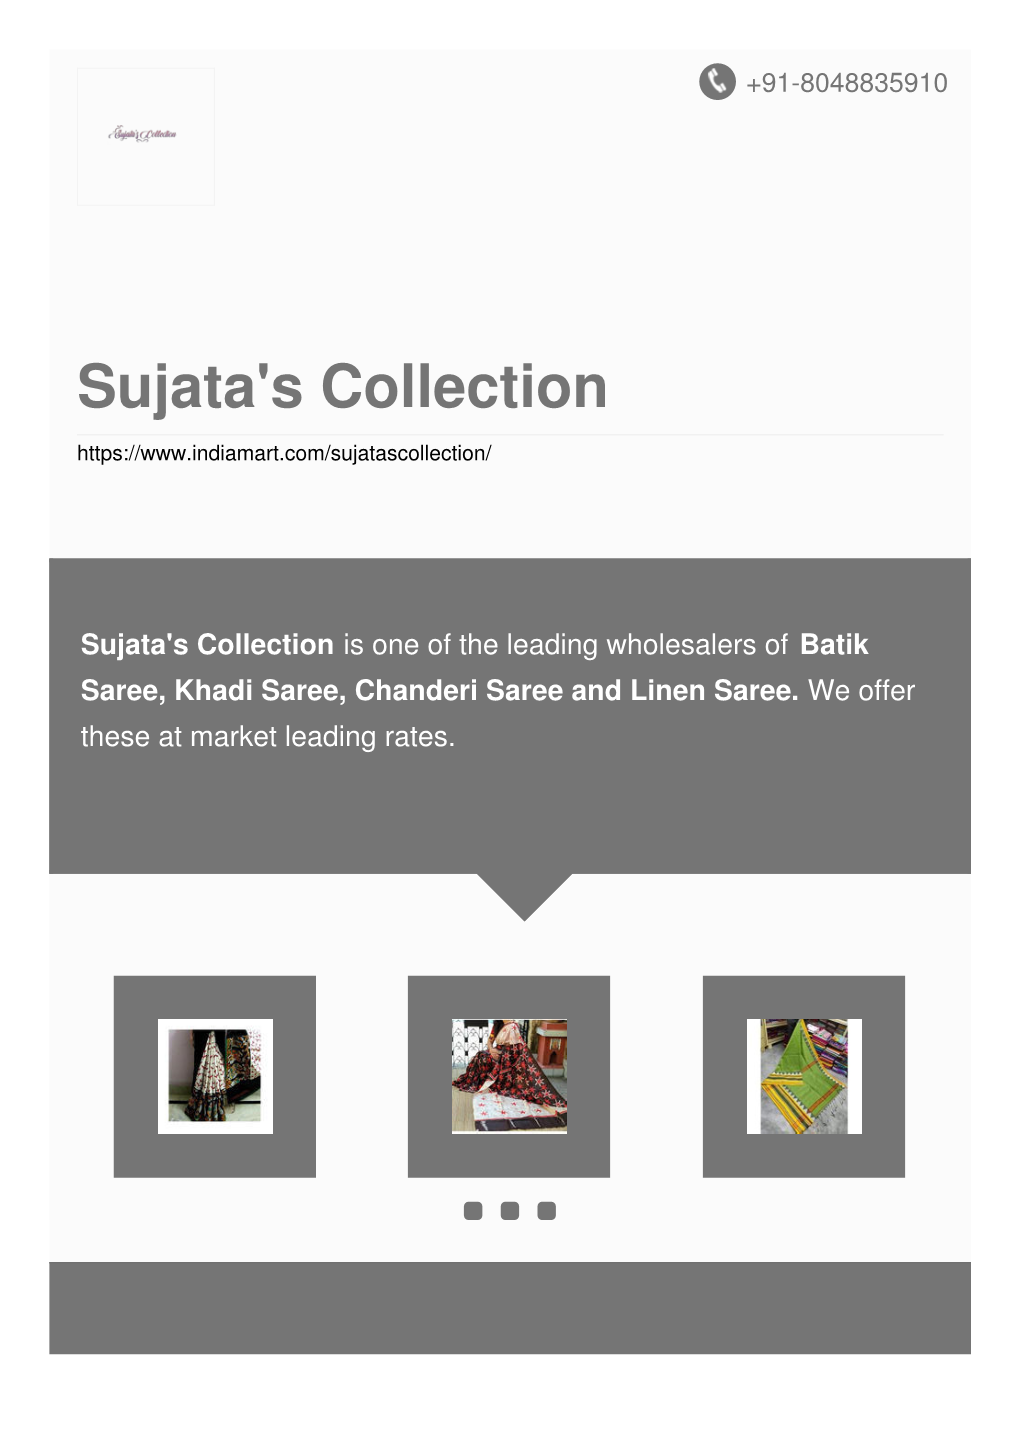 Sujata's Collection